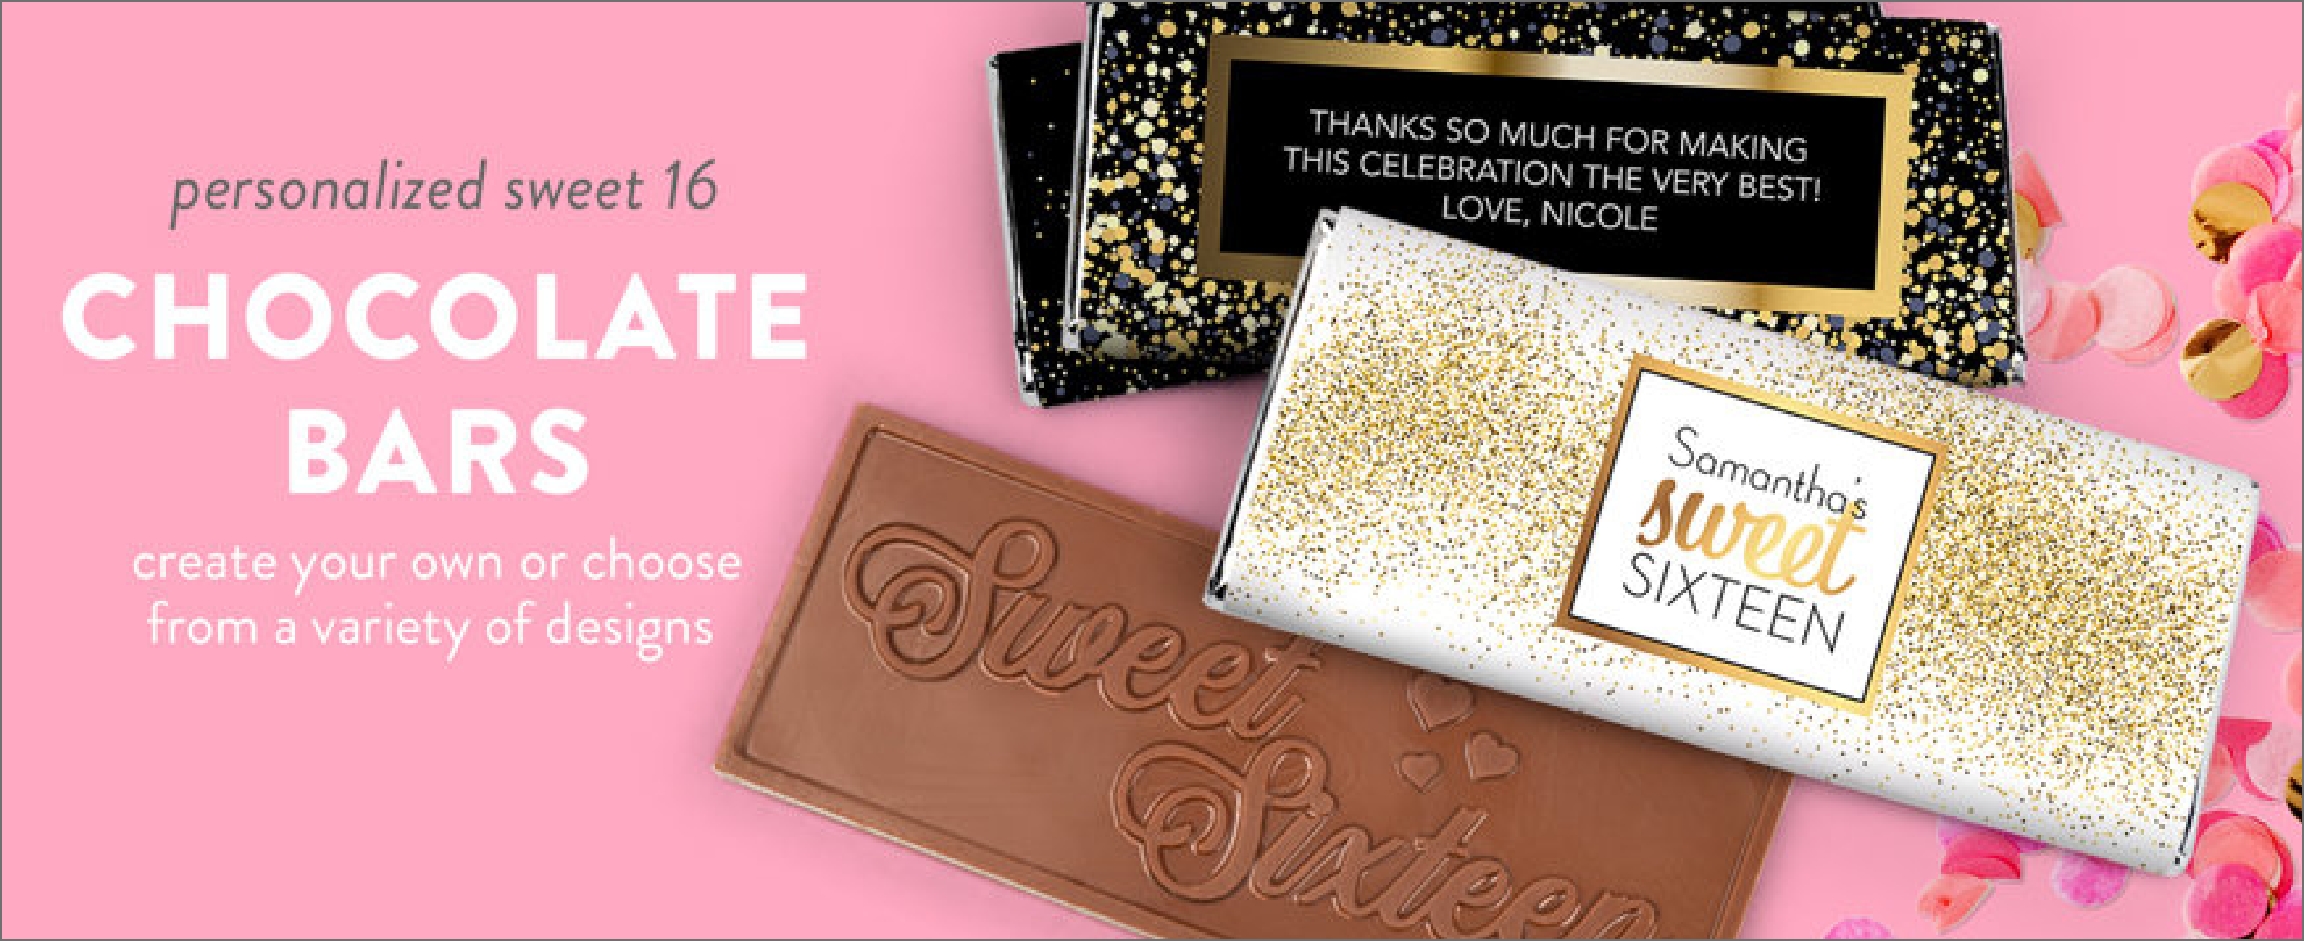 shop sweet 16 personalized chocolate bars